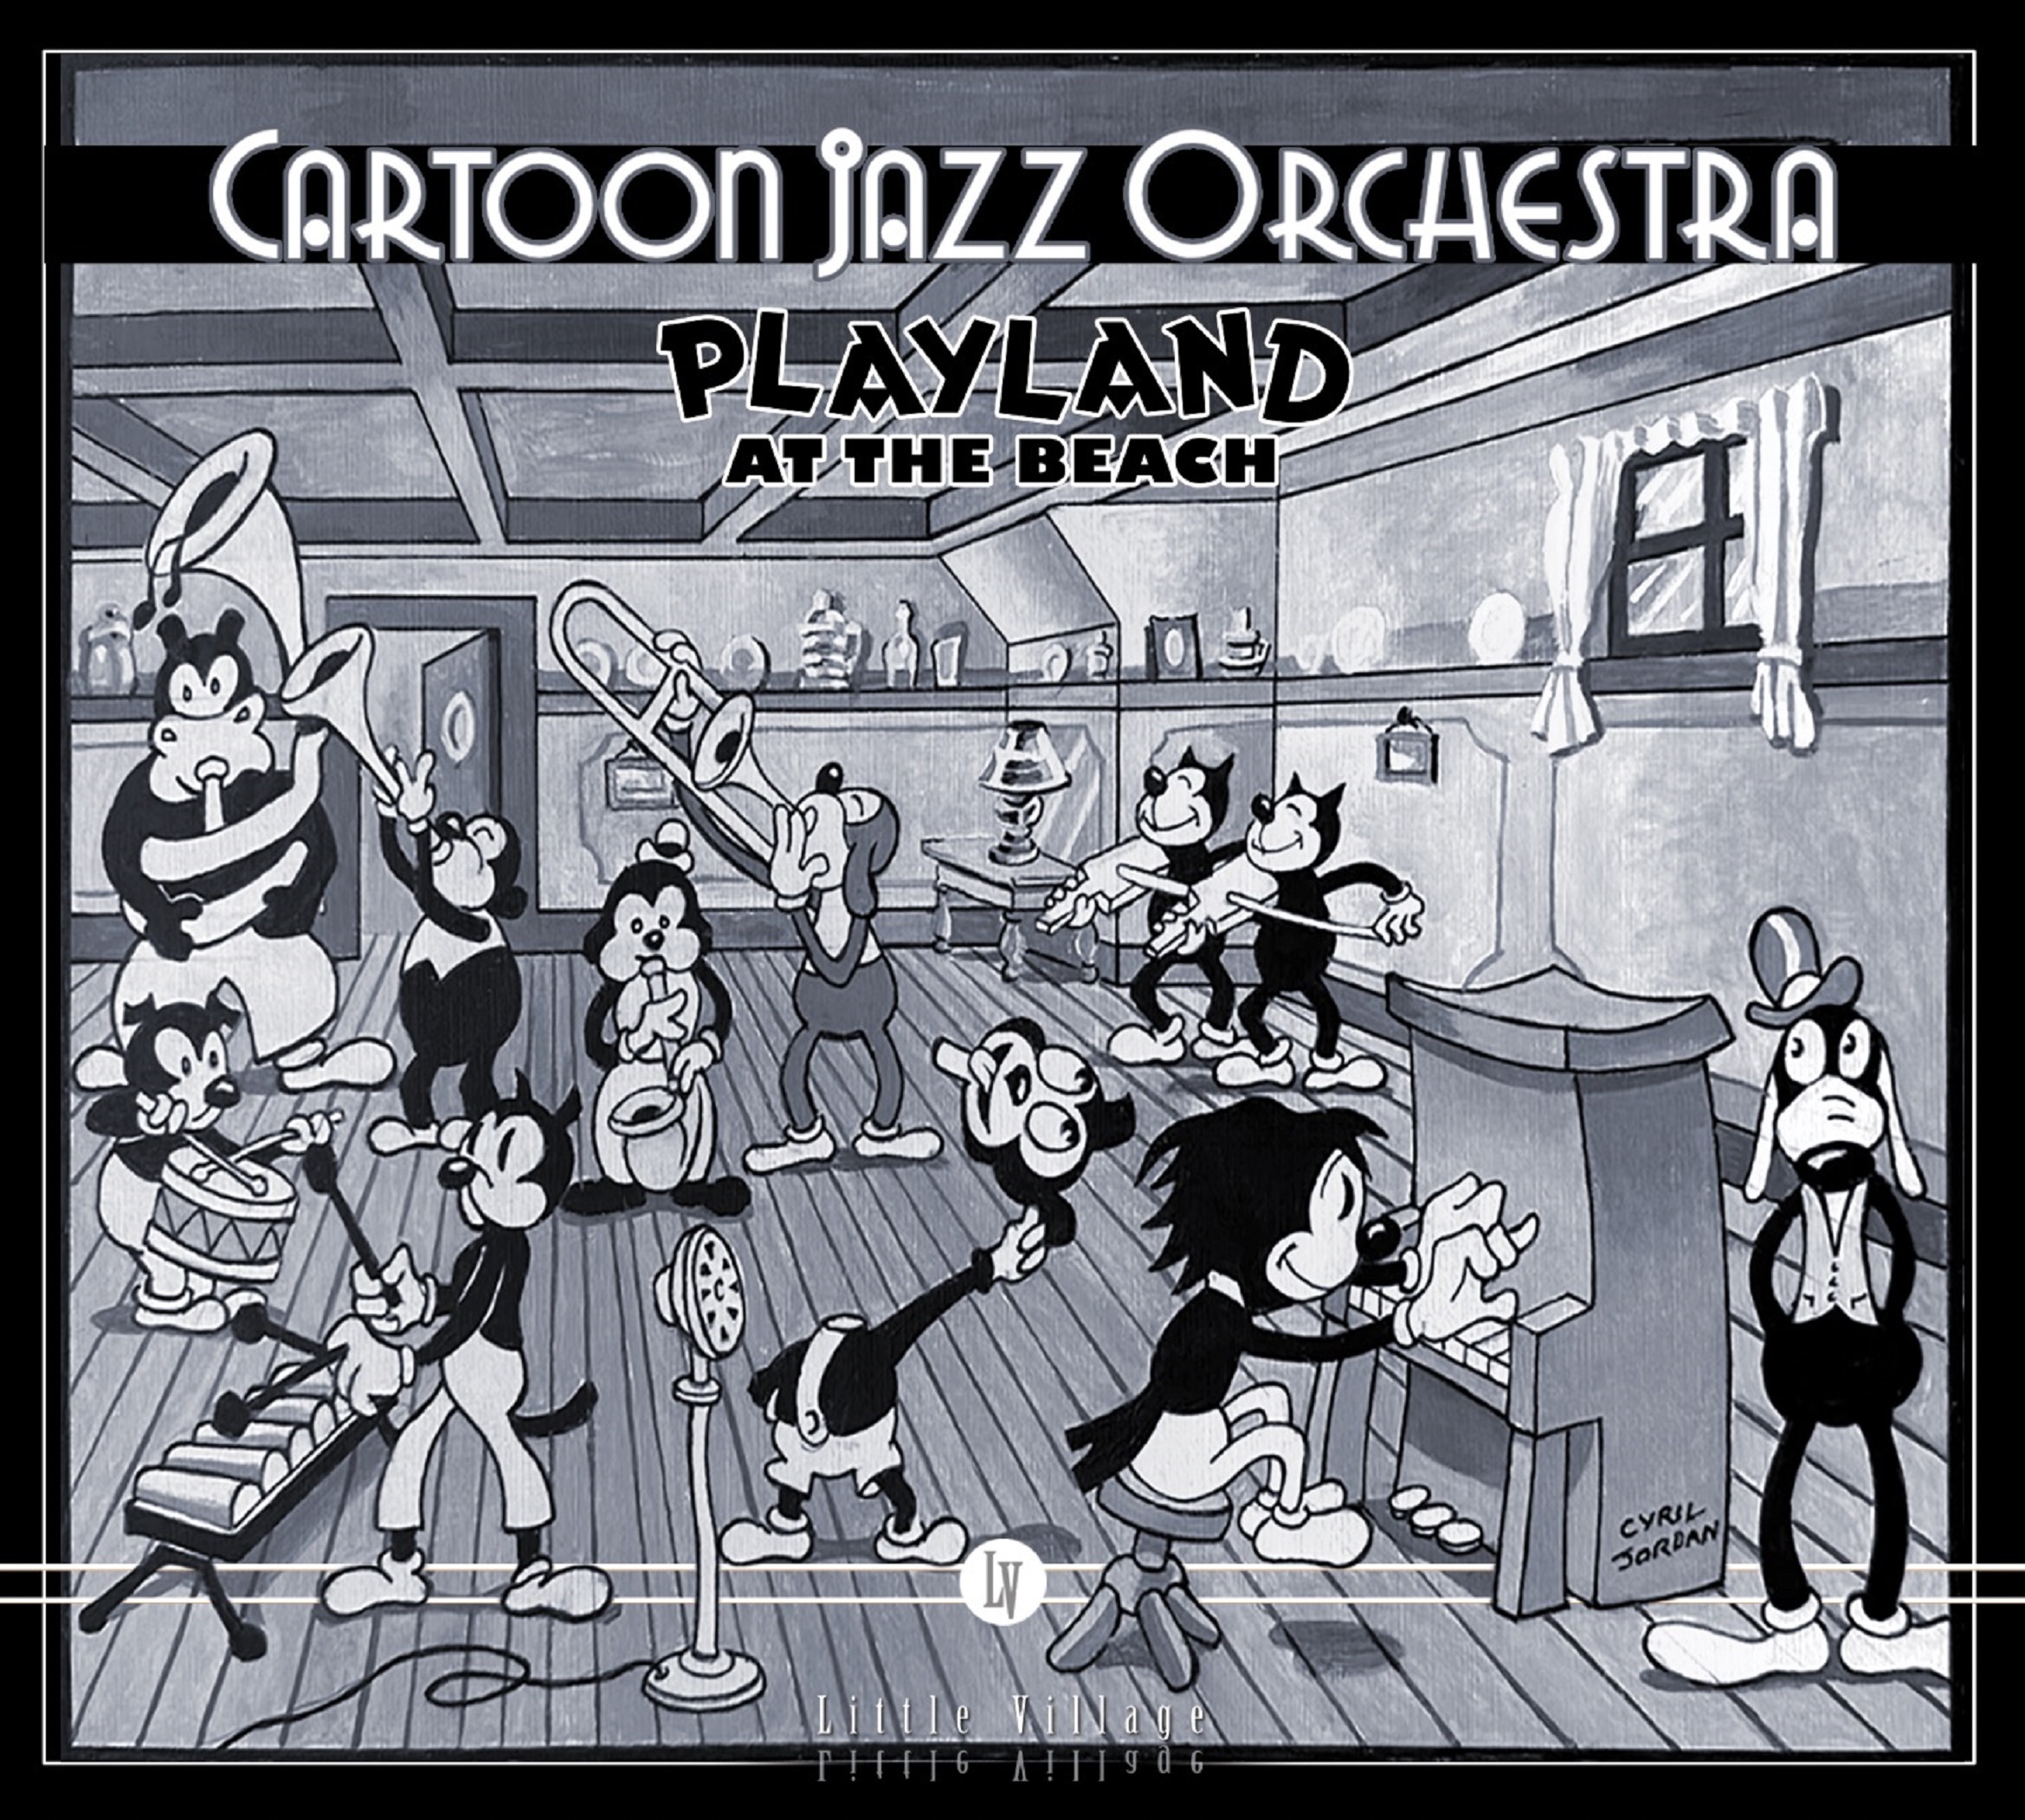 Tooning into Jazz: Jeff Sanford’s Cartoon Jazz Orchestra Swings into Playland at the Beach